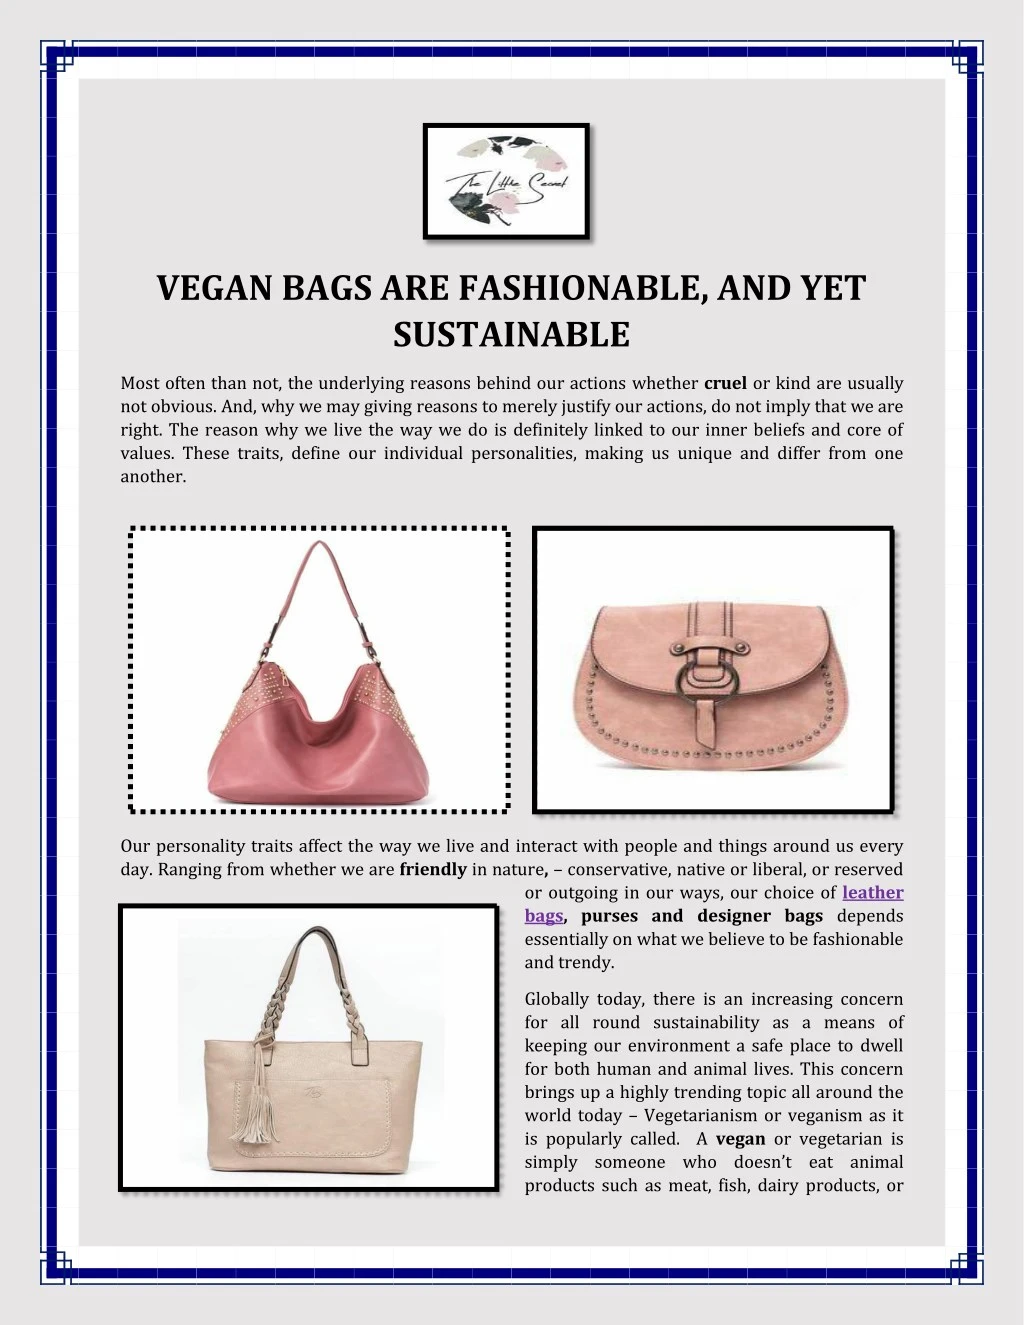 vegan bags are fashionable and yet sustainable